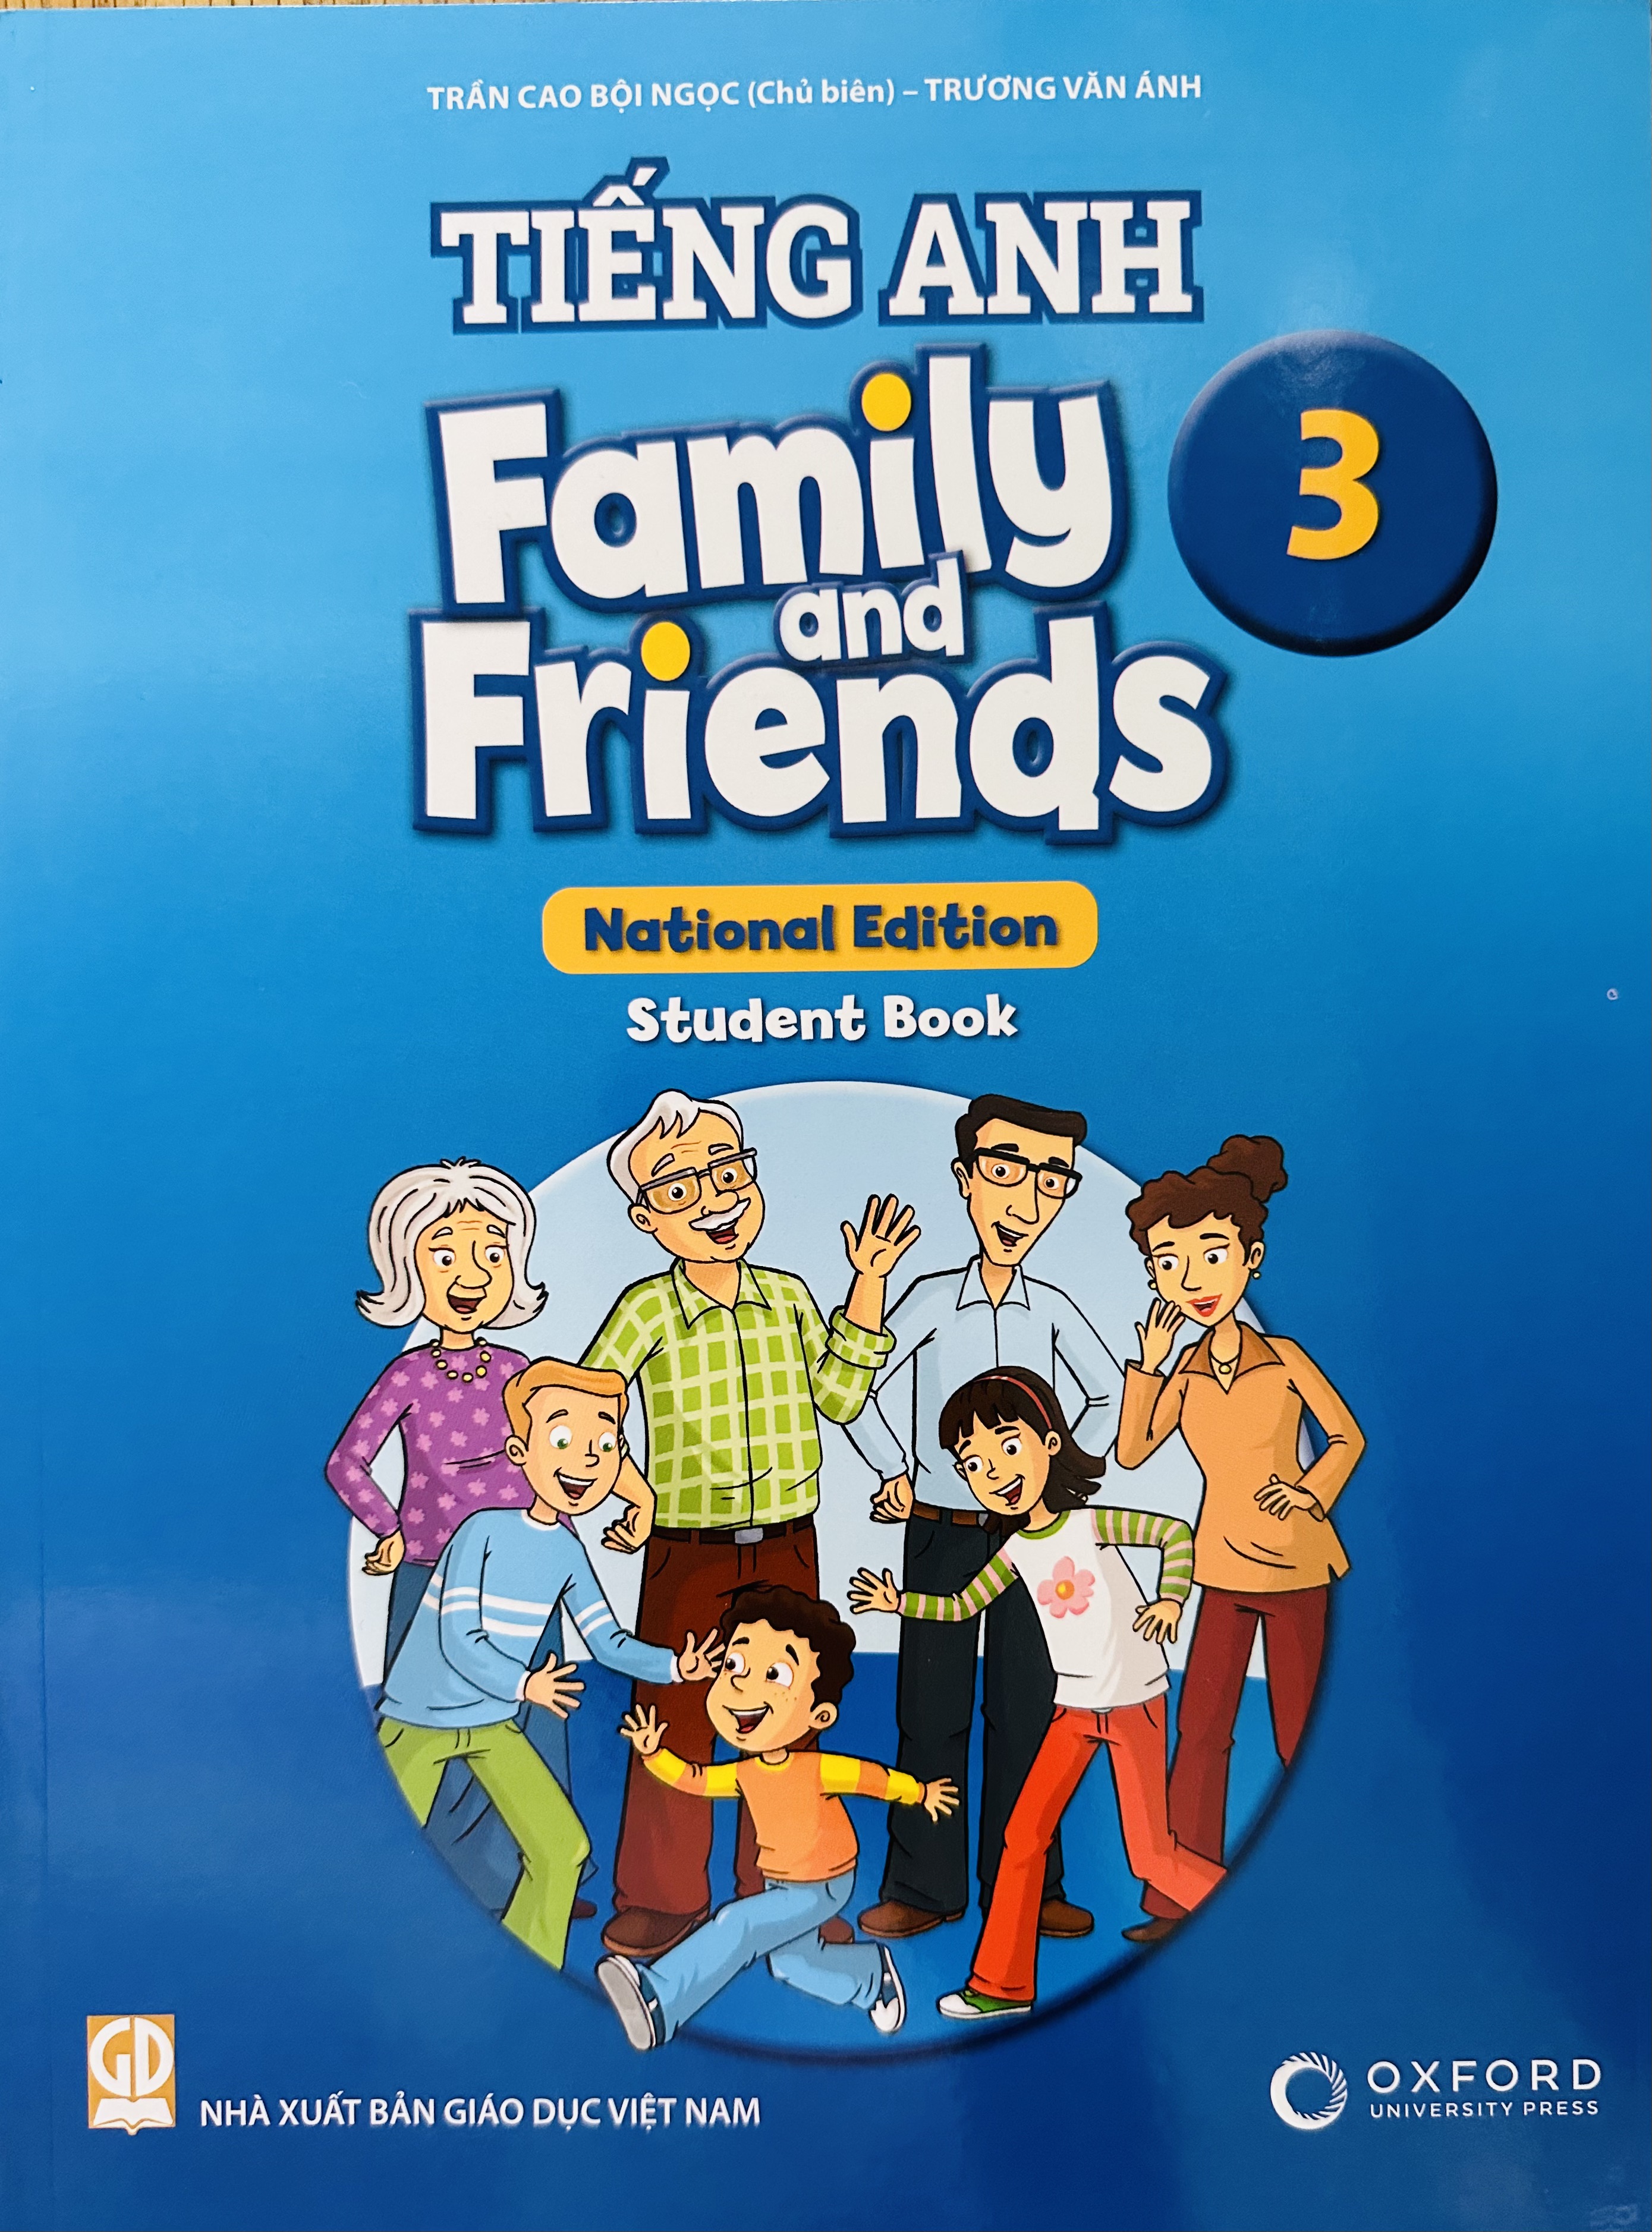 Family And Friends 3 (National Edition) - Student Book